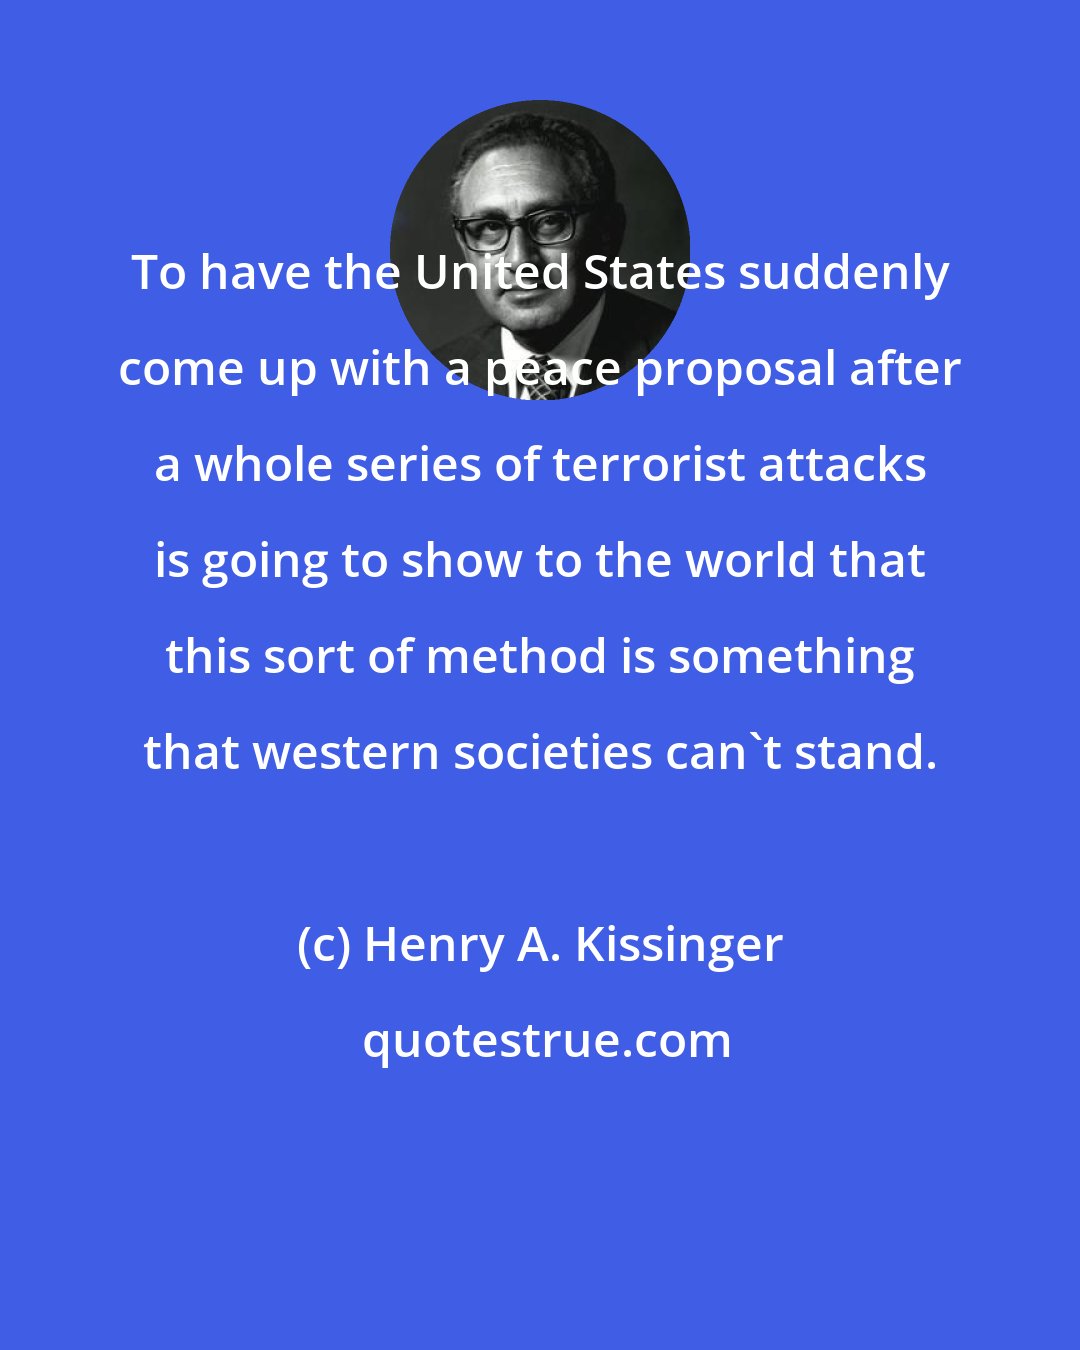 Henry A. Kissinger: To have the United States suddenly come up with a peace proposal after a whole series of terrorist attacks is going to show to the world that this sort of method is something that western societies can't stand.